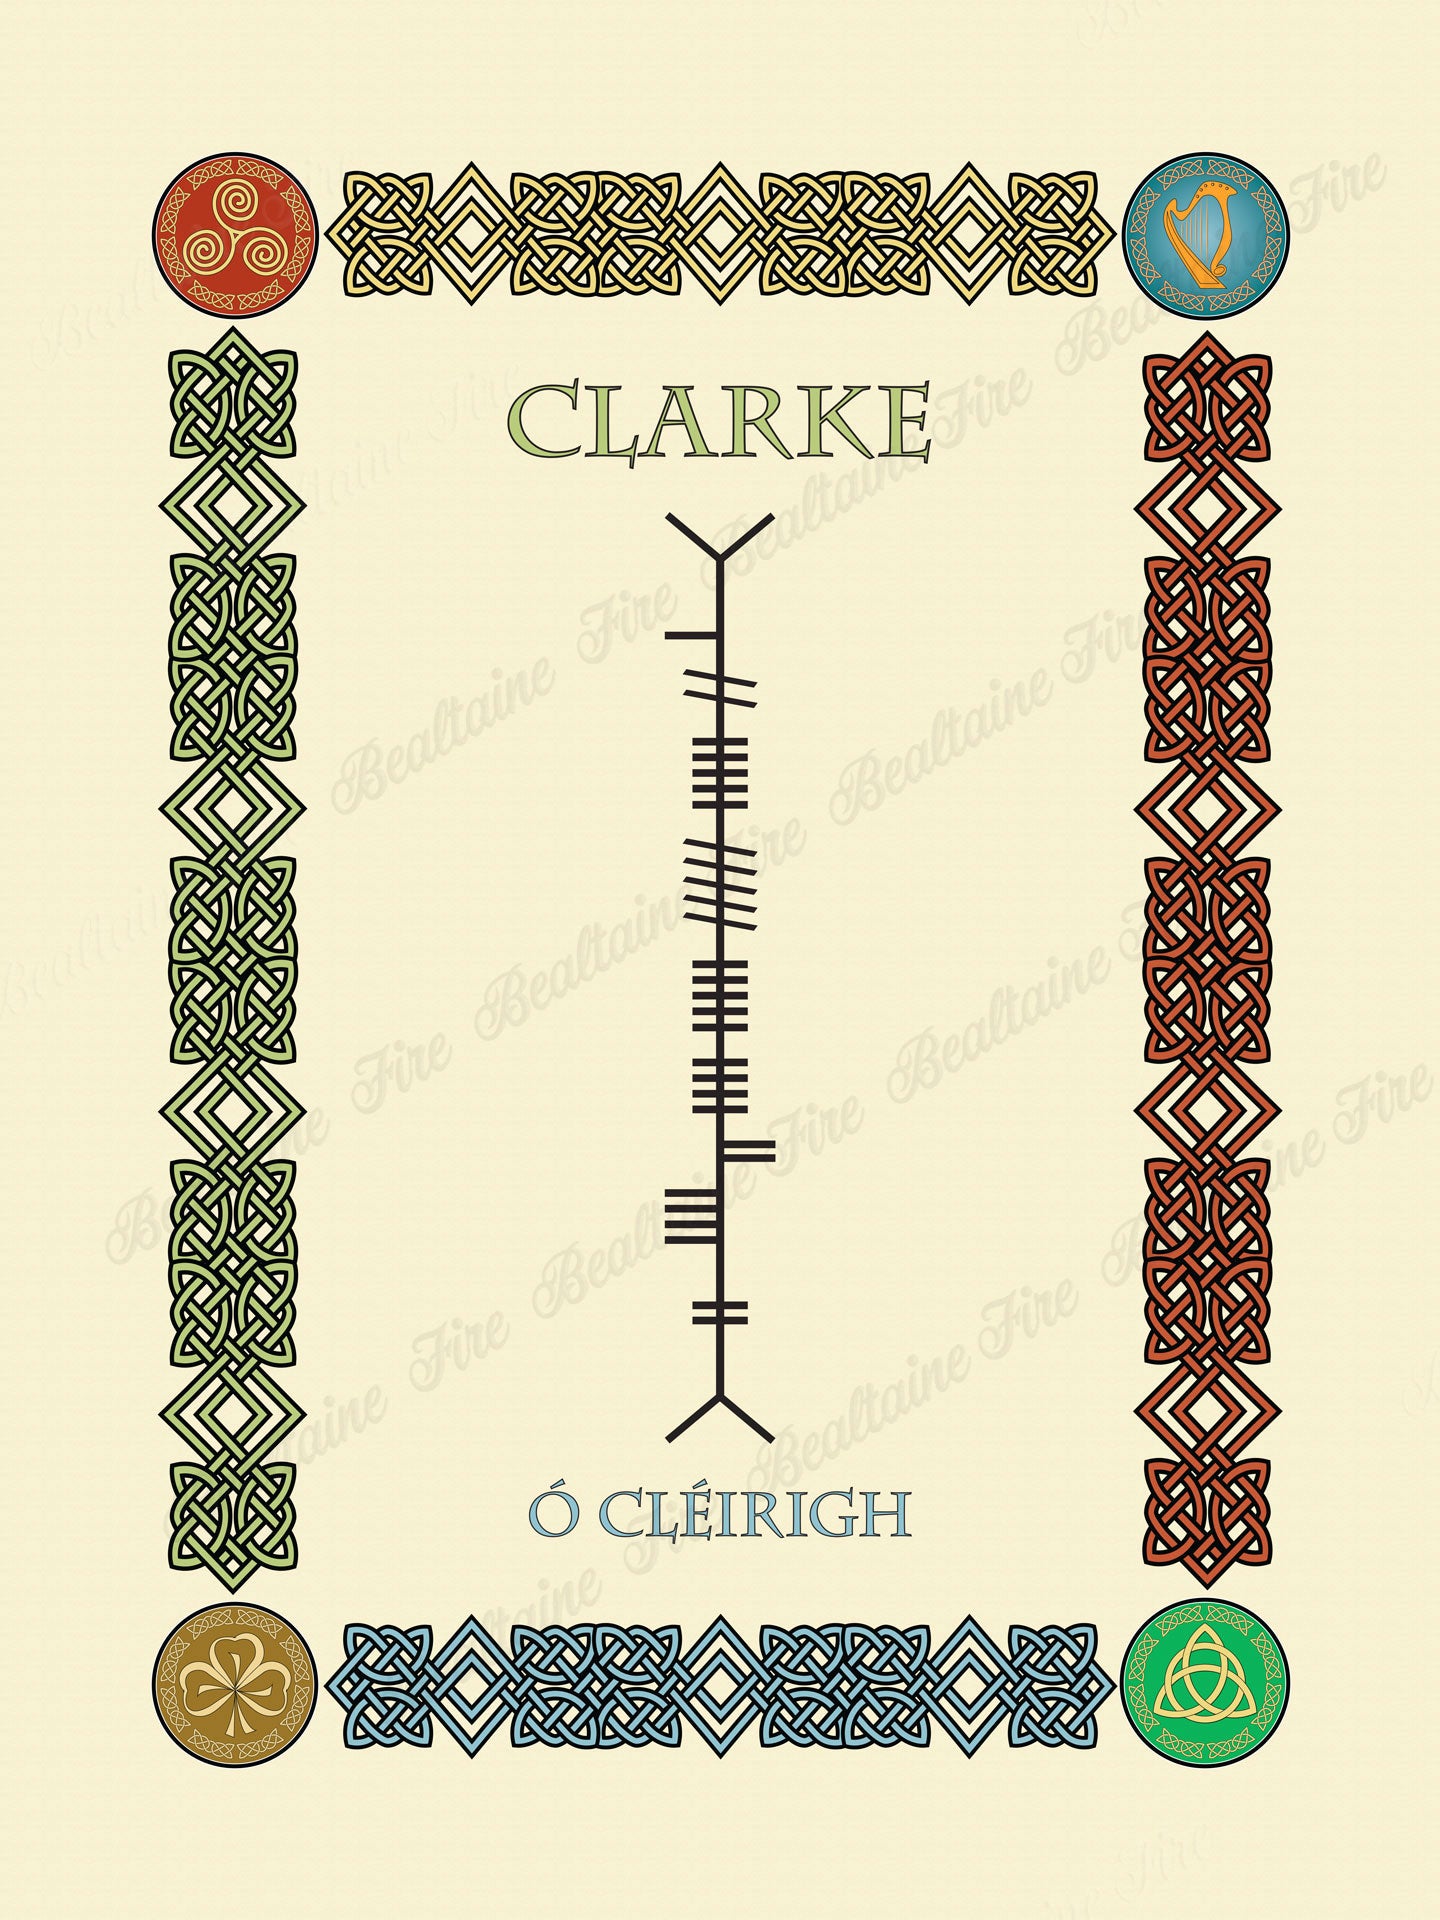 Clarke in Old Irish and Ogham - PDF Download